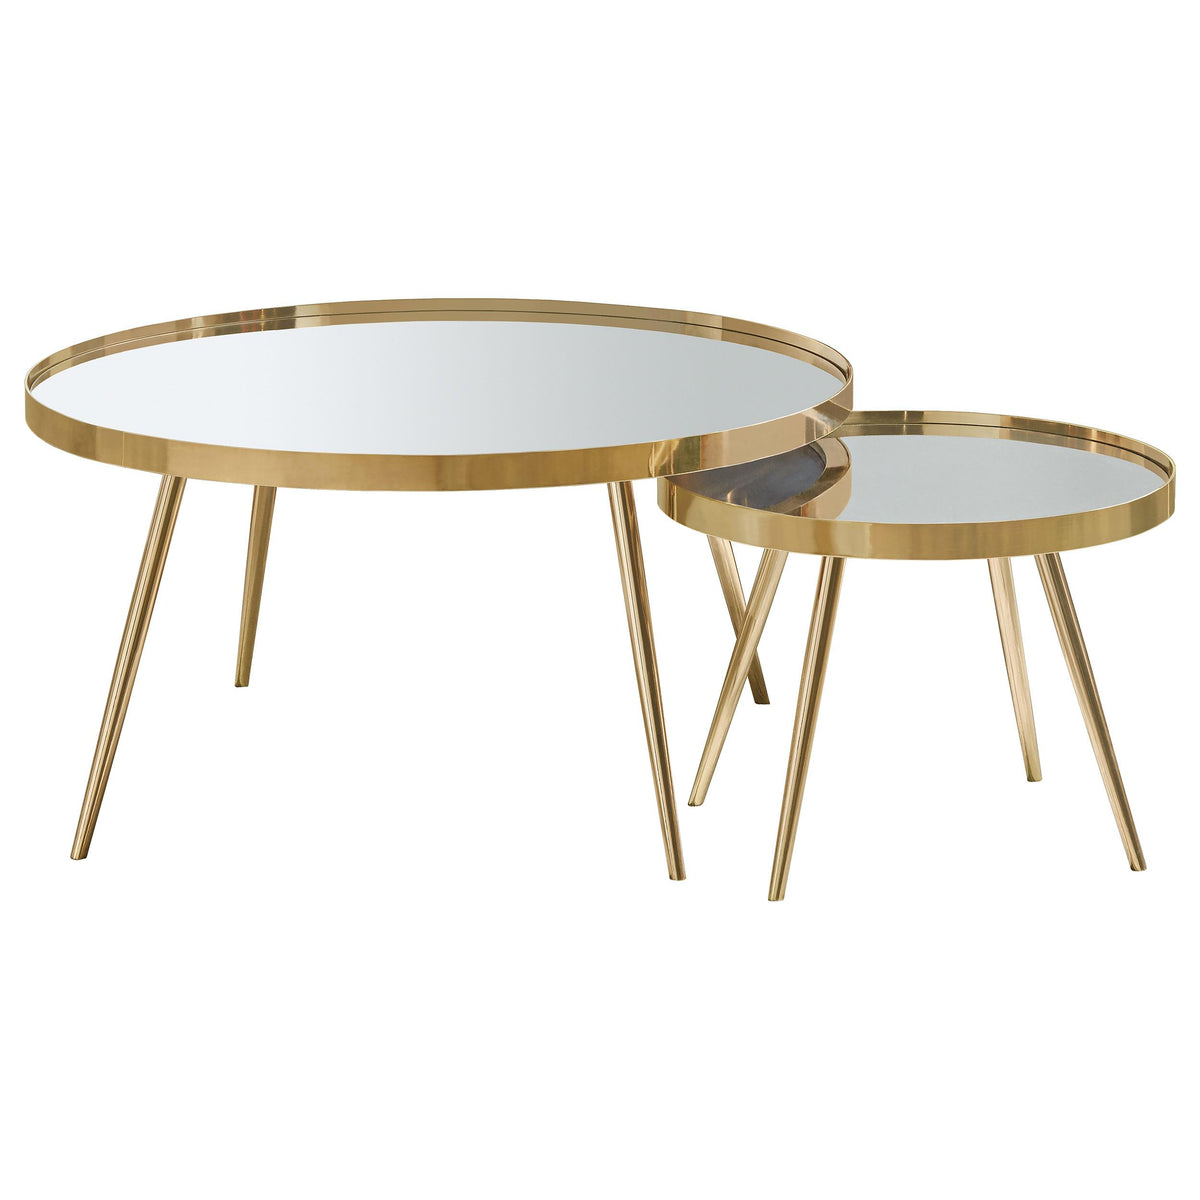 Kaelyn 2-piece Mirror Top Nesting Coffee Table Mirror and Gold  Half Price Furniture